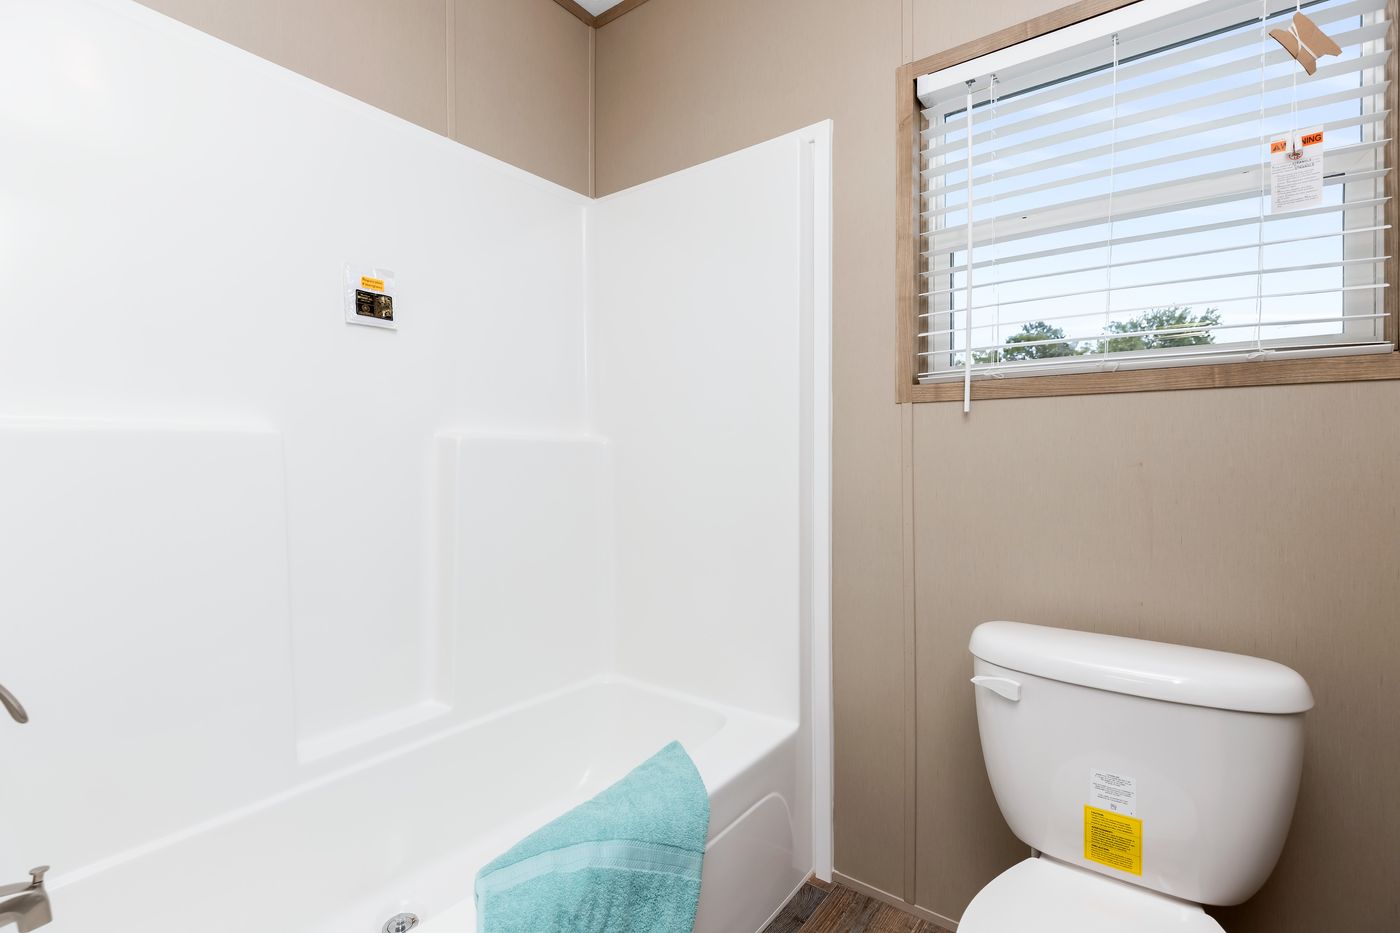 The FARMHOUSE FLEX Guest Bathroom. This Manufactured Mobile Home features 3 bedrooms and 2.5 baths.